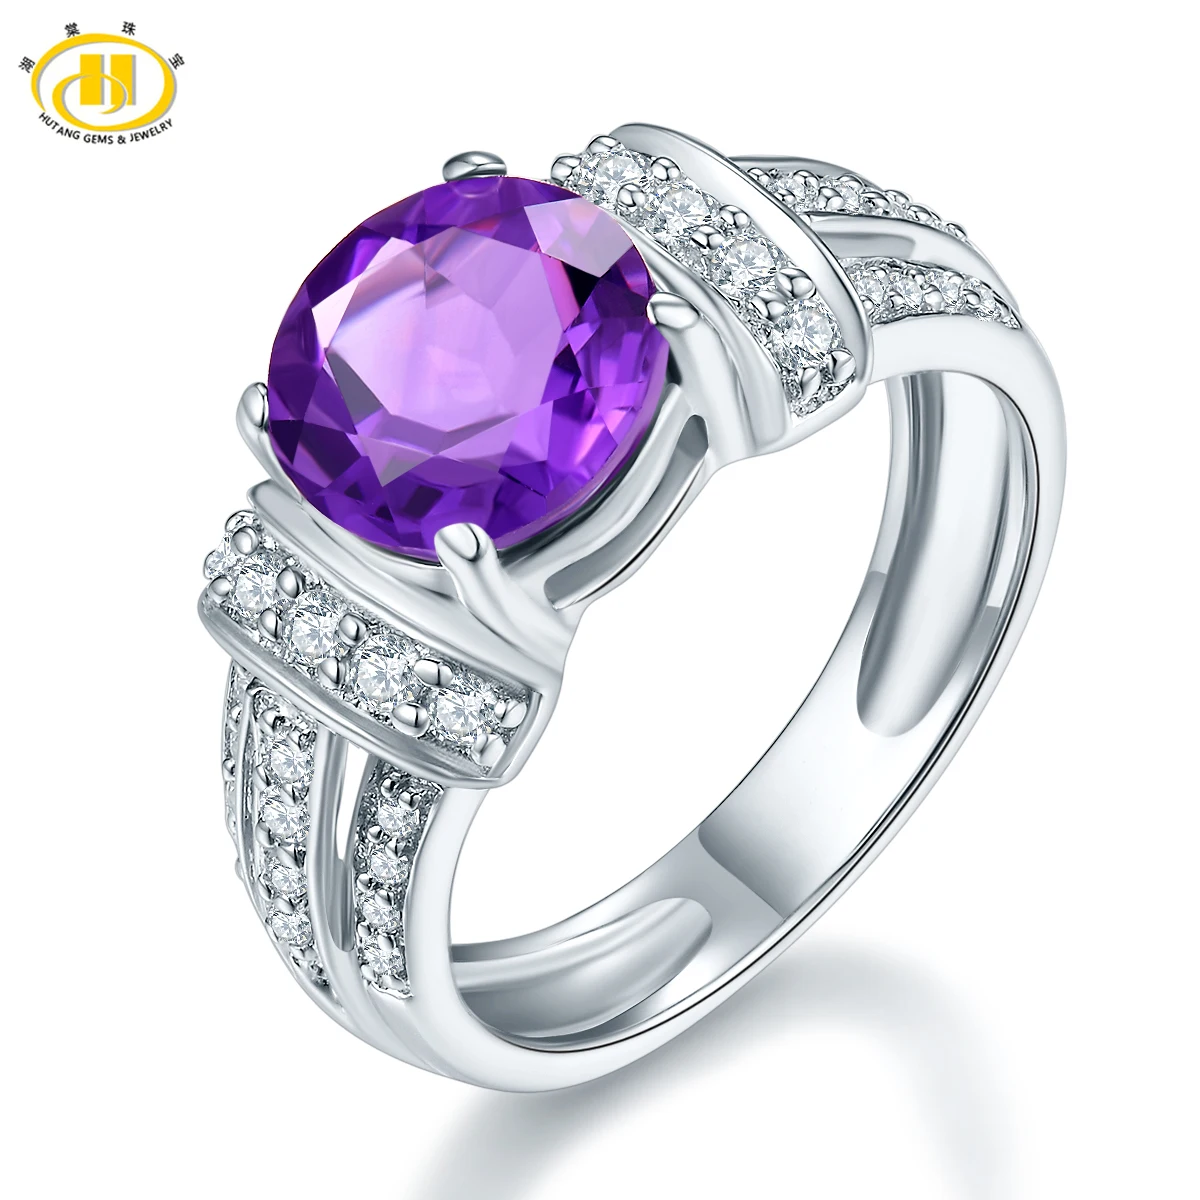 Hutang 1.673ct Natural Amethyst Ring For Women 925 Sterling Silver